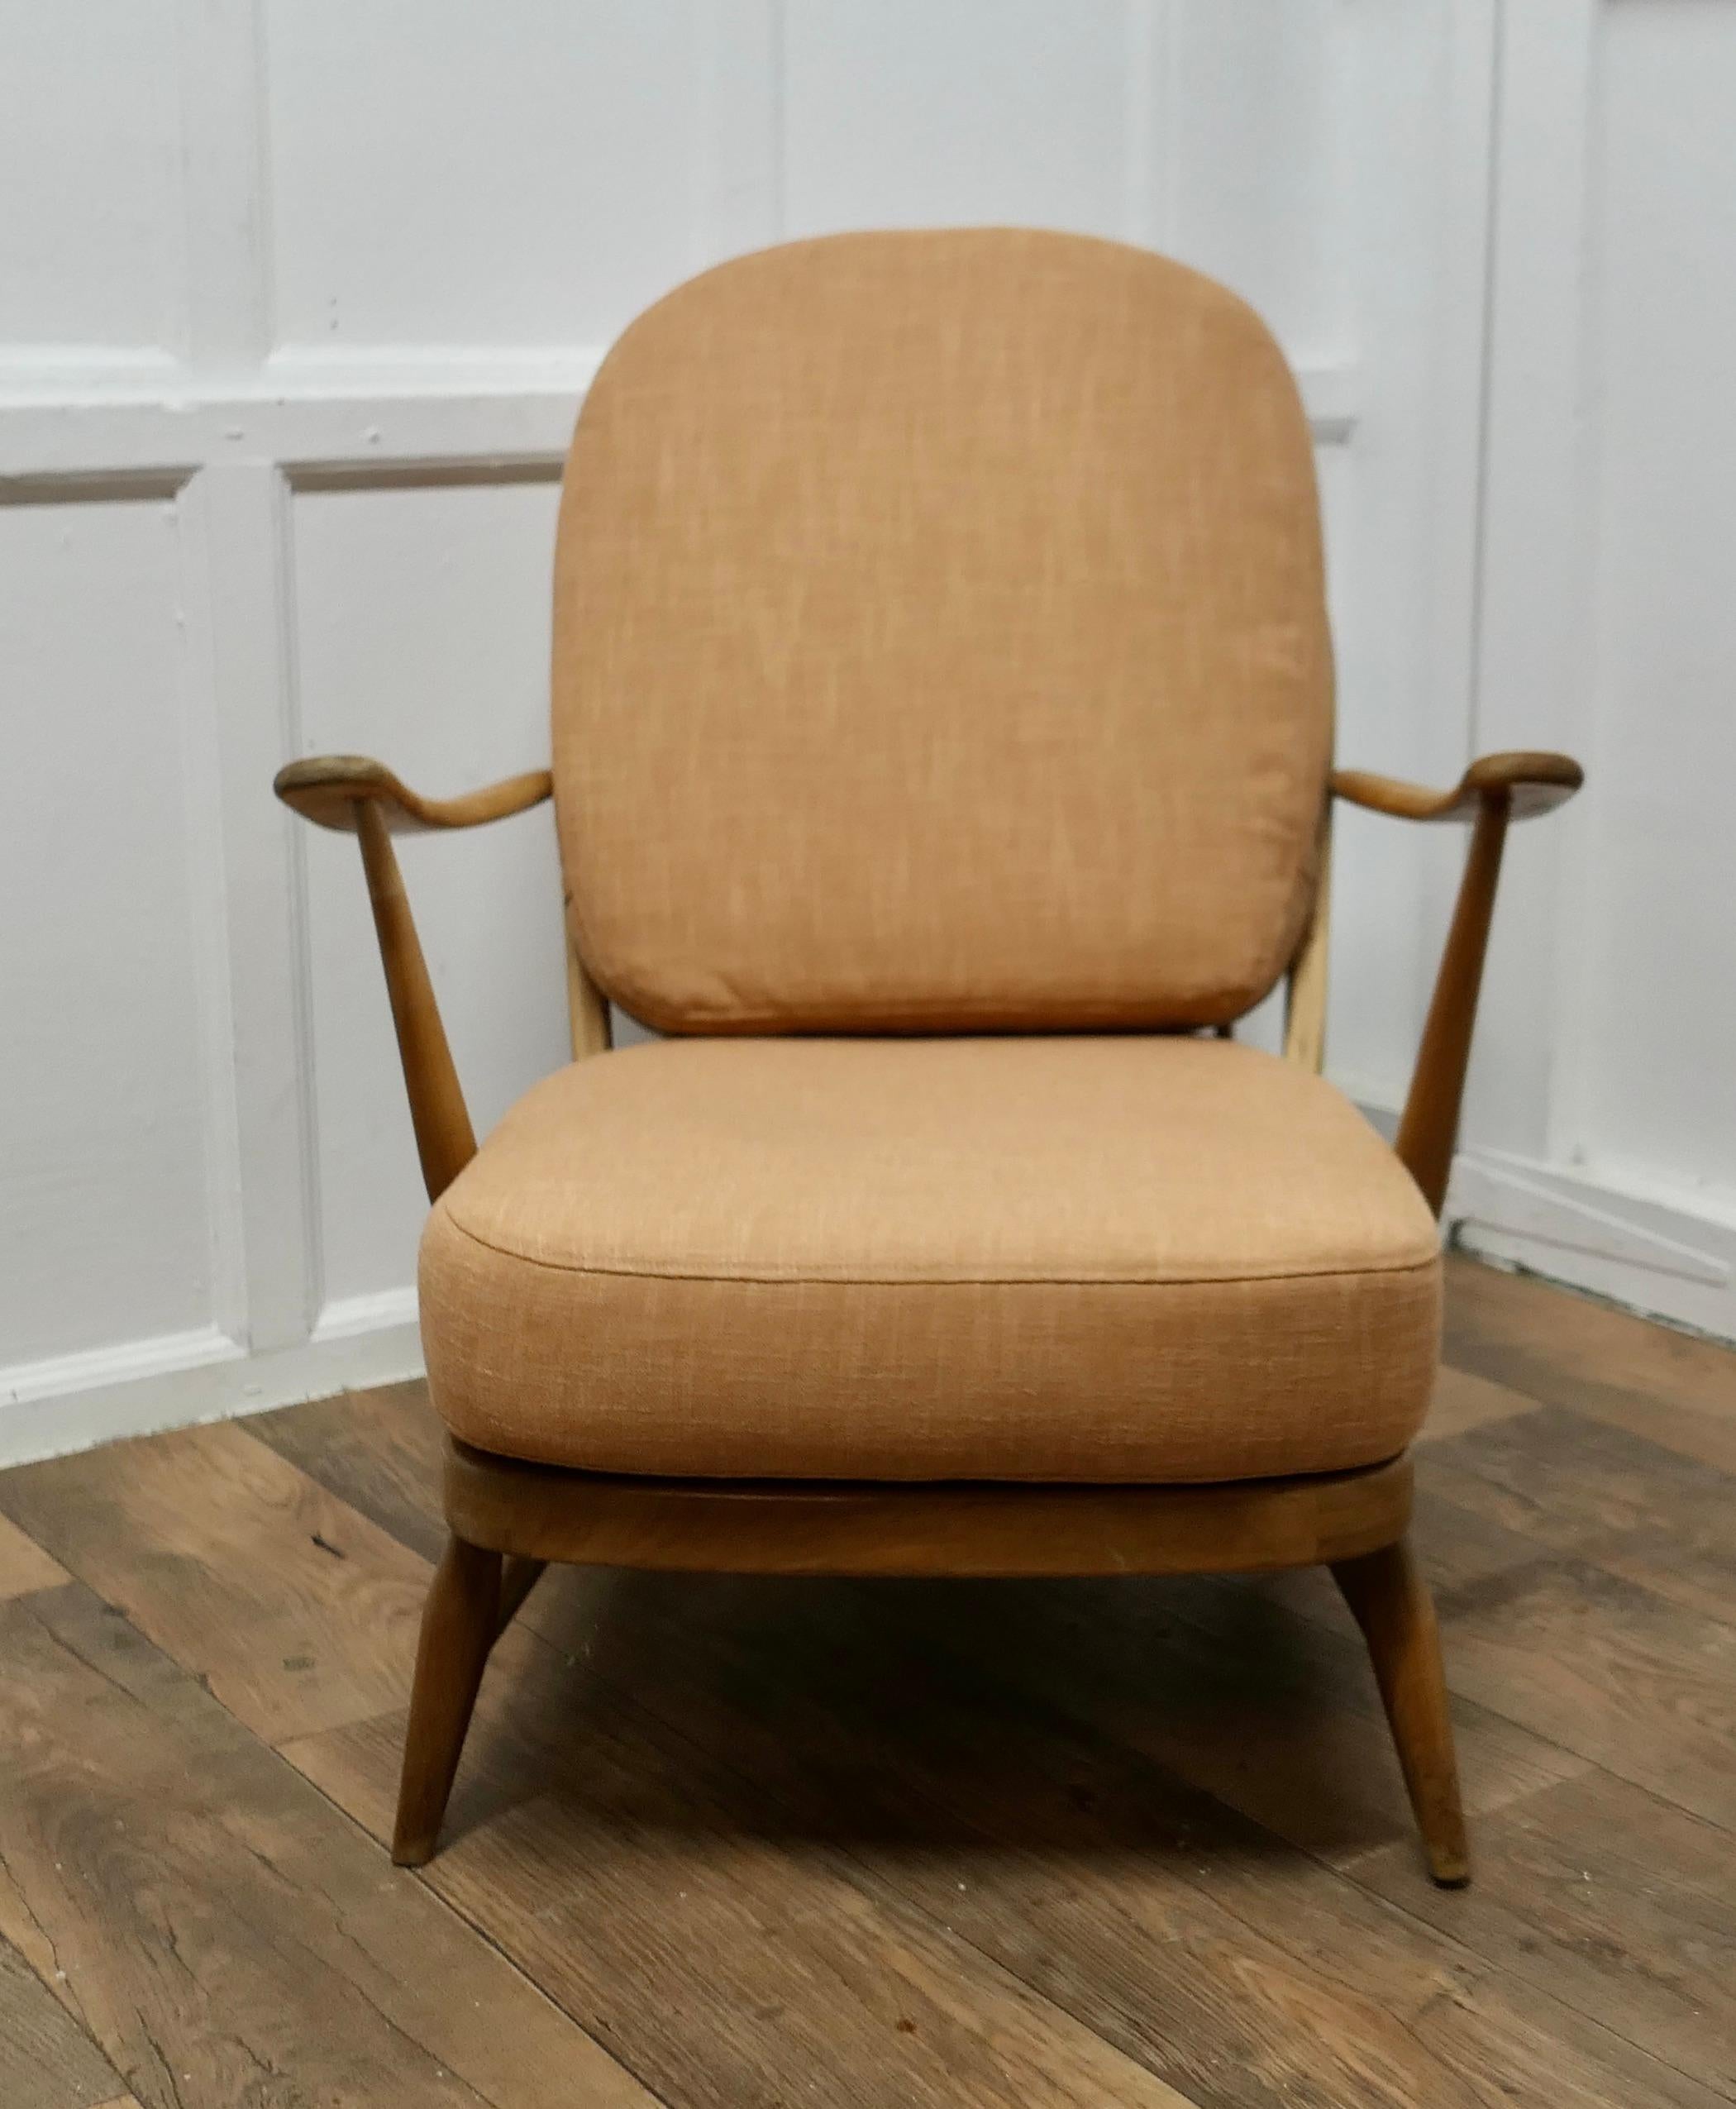 Beech Ercol Windsor Easy Chair   The chair is a classic design and traditionally made  For Sale